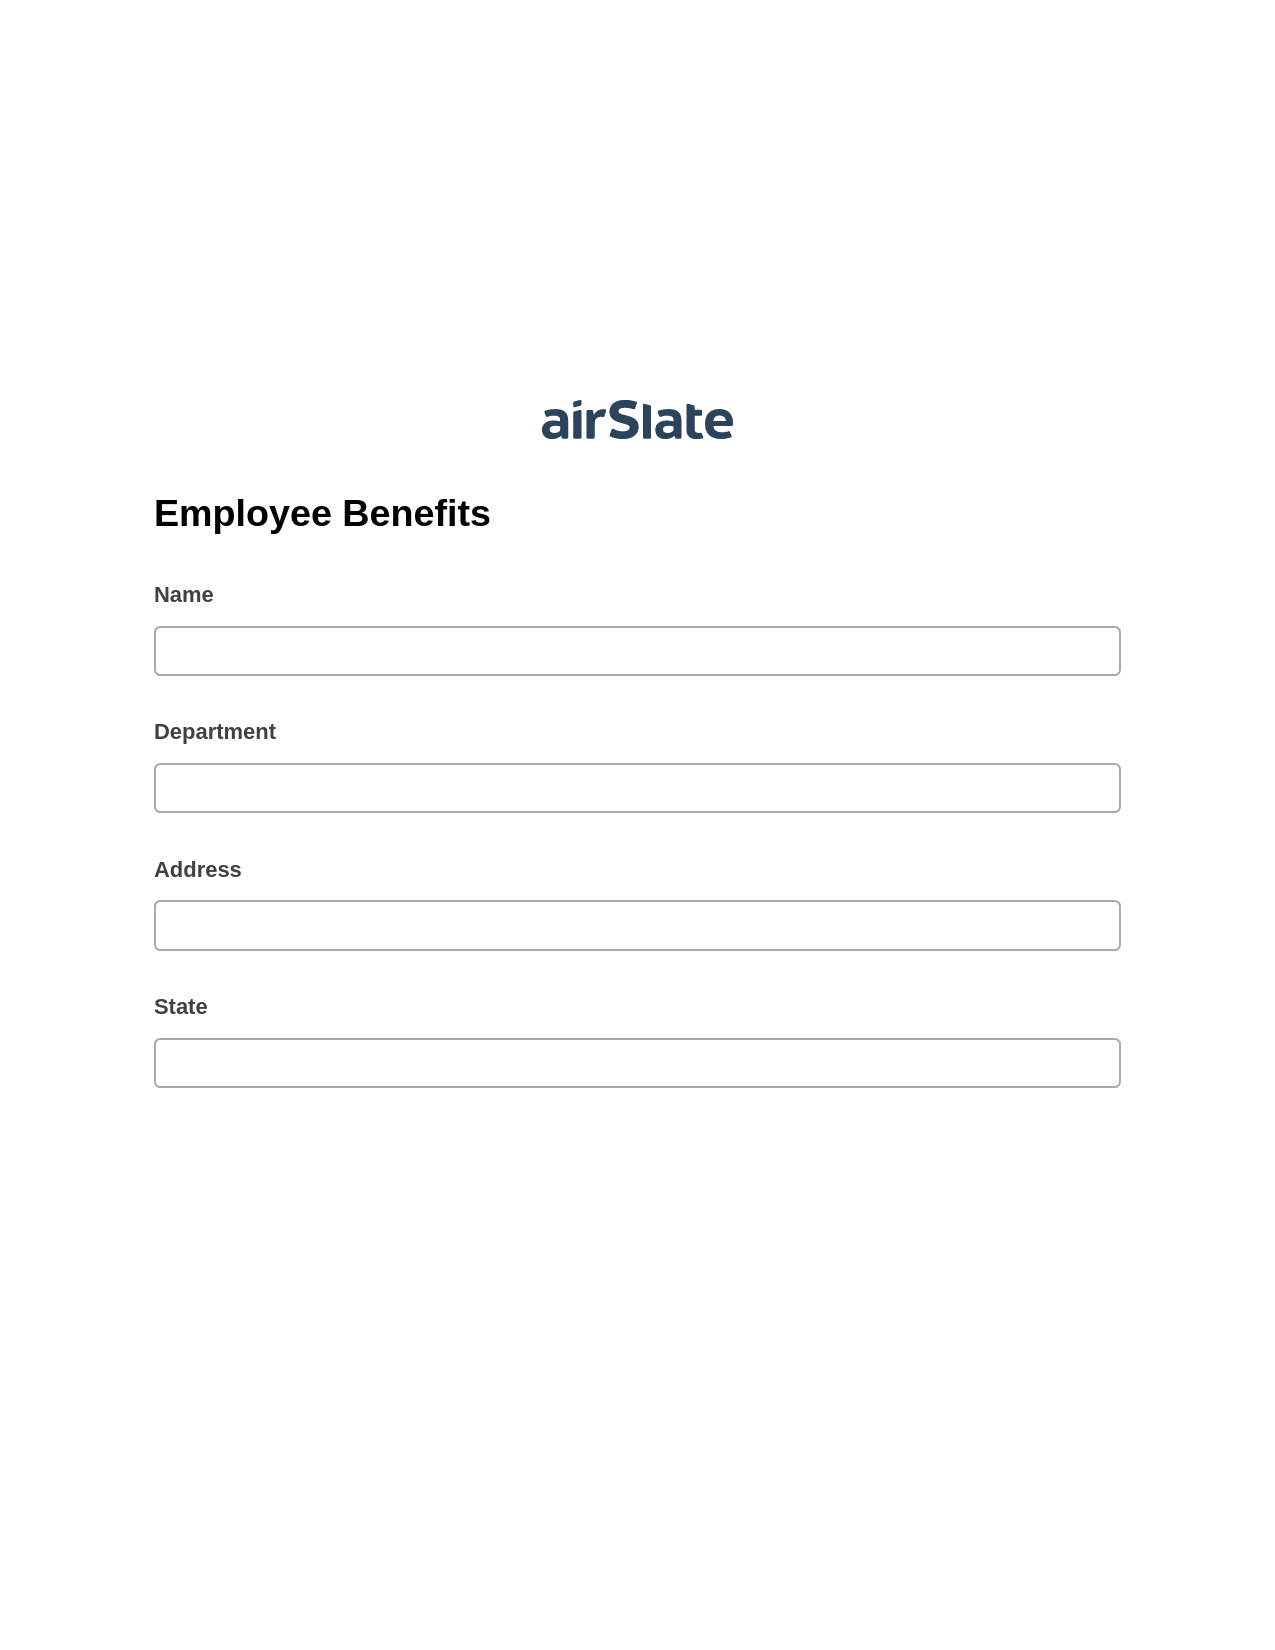 Multirole Employee Benefits Pre-fill from another Slate Bot, Revoke Access Bot, Export to Excel 365 Bot